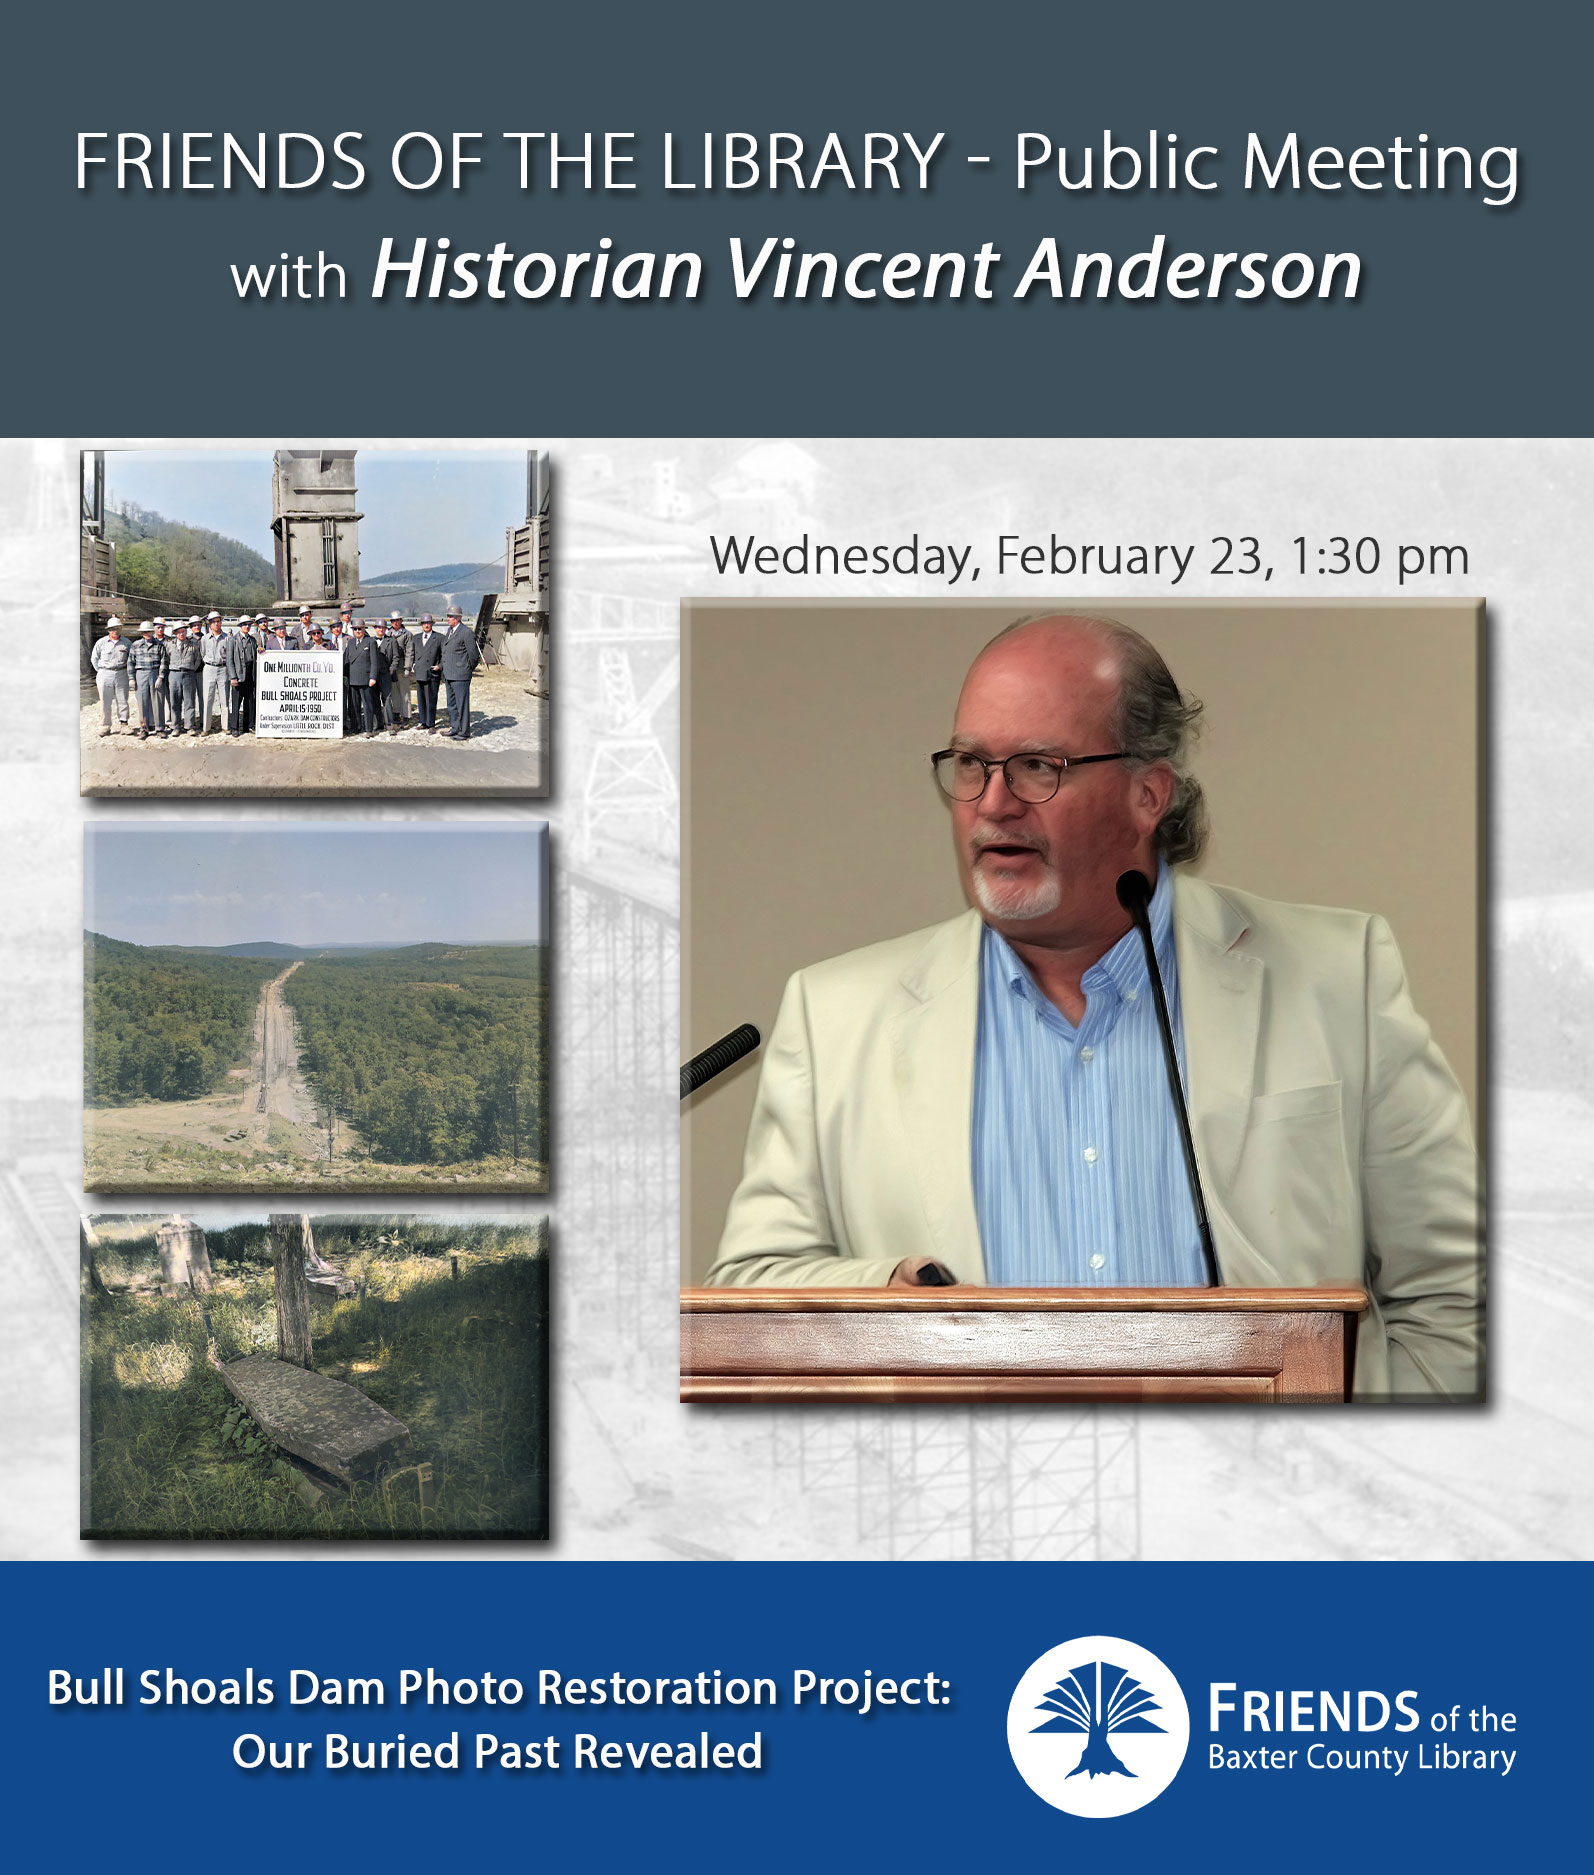 Bull Shoals Dam photo restoration project with Historian Vincent Anderson